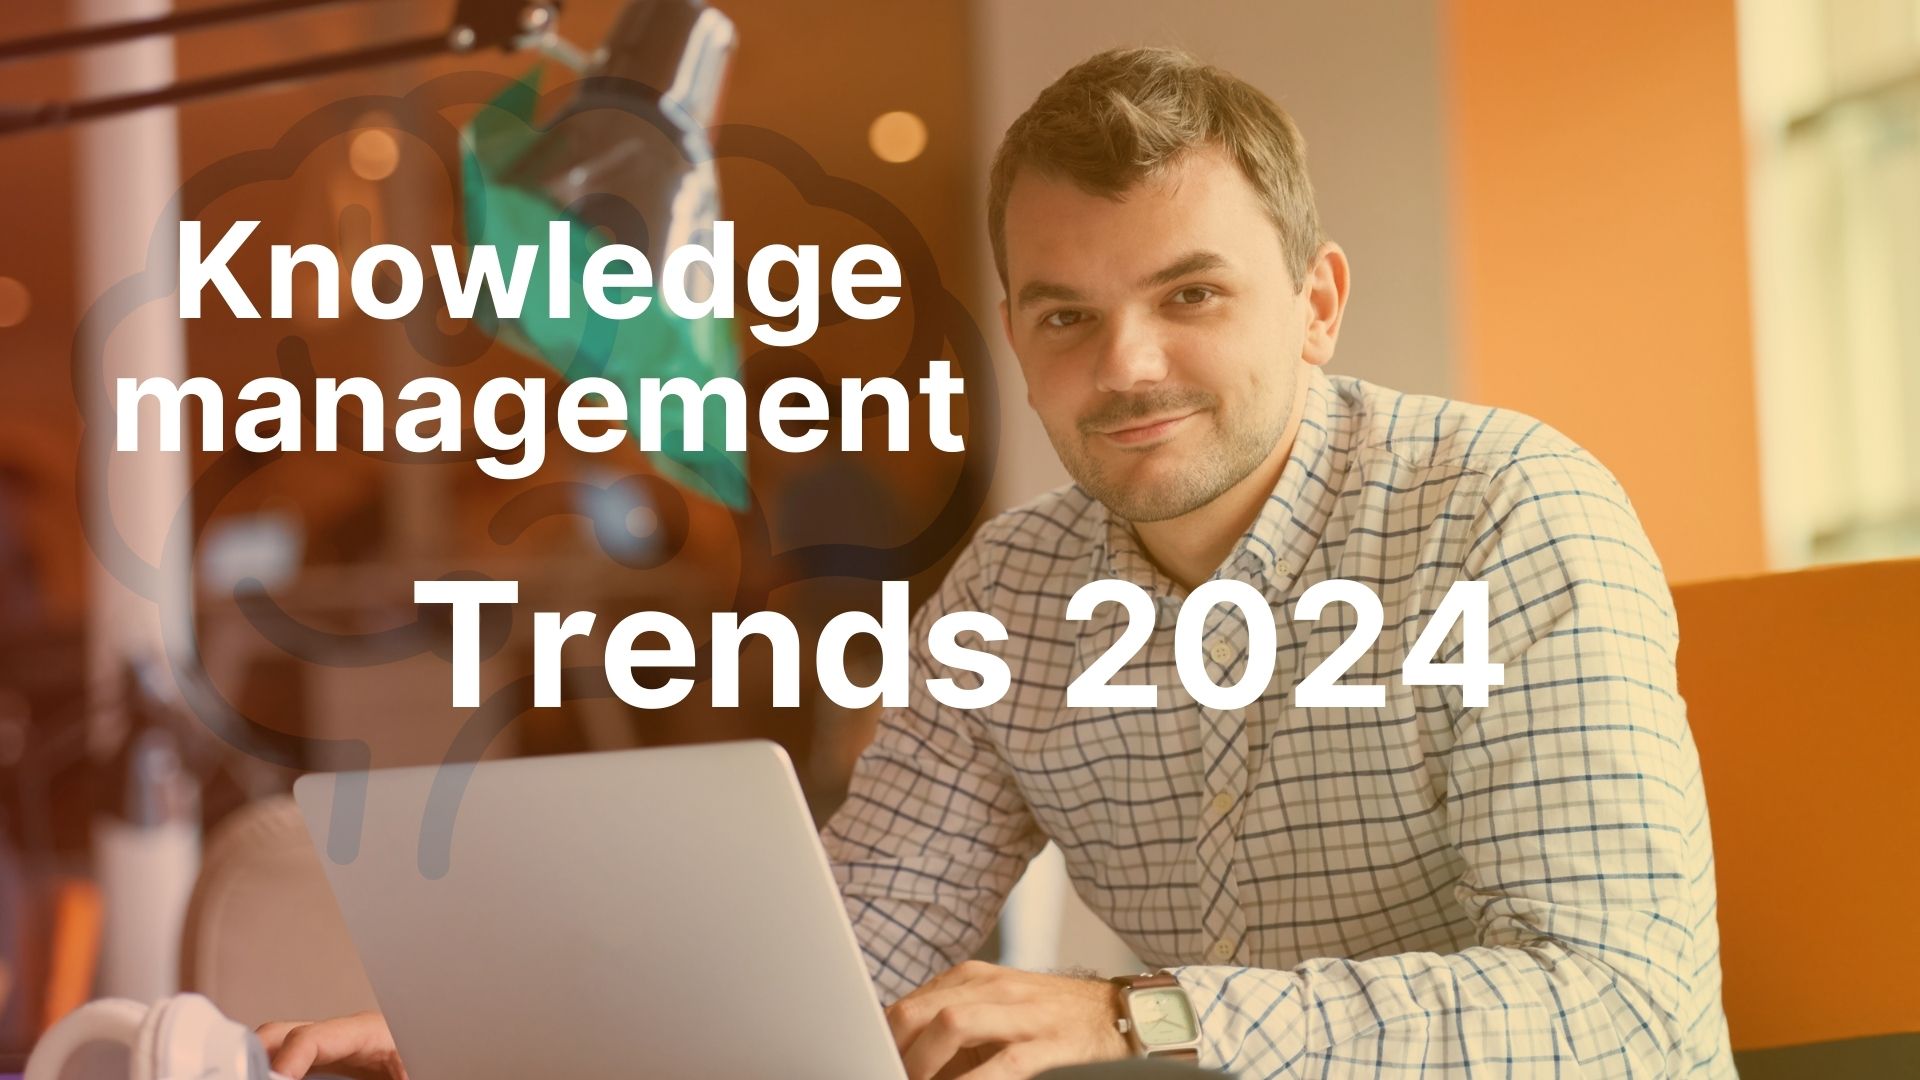 Knowledge management trends 2024